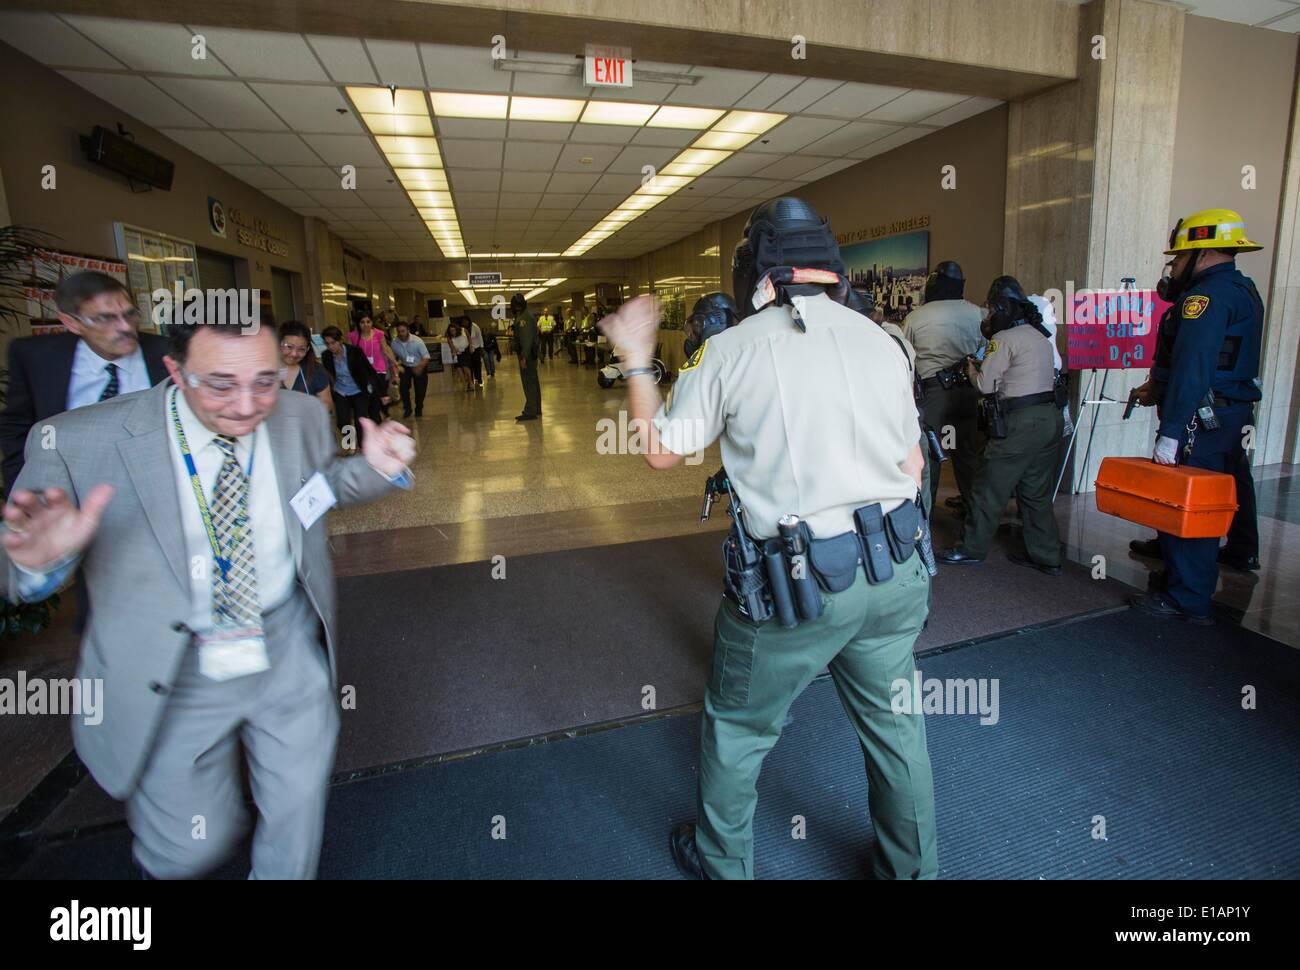 Los Angeles, USA. 28th May, 2014. Members of Special Enforcement Bureau evacuate the County staff at Los Angeles County Hall of Administration during a training exercise involving a simulated shooting in downtown Los Angeles, the United States, on May 28, 2014. The Los Angeles County Sheriff's Department held a large-scale training exercise involving a simulated shooting taking place at a Board of Supervisors meeting here Wednesday. Credit:  Zhao Hanrong/Xinhua/Alamy Live News Stock Photo